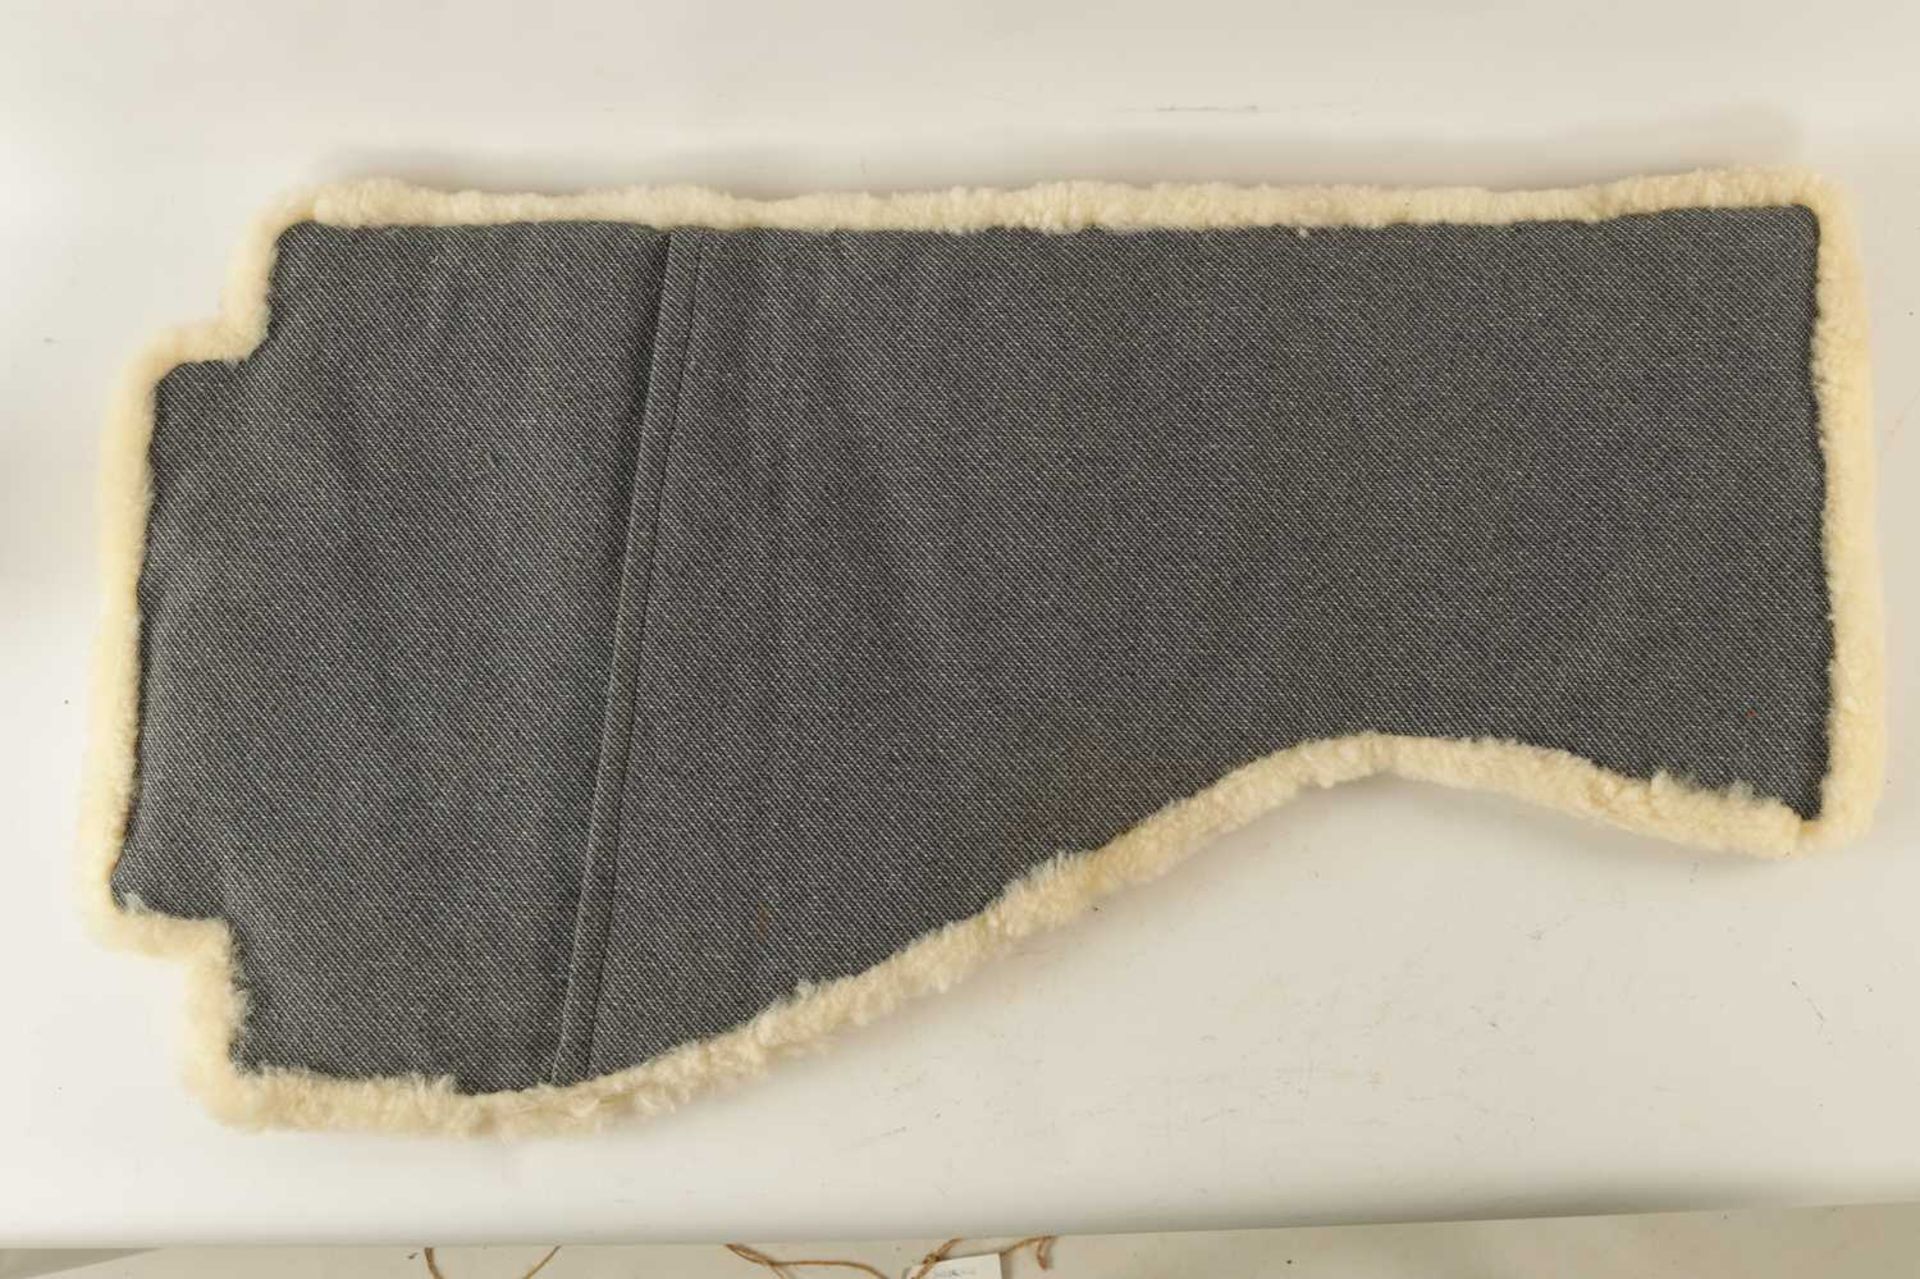 TWO SHEEPSKIN FOOTWELL MATS POSSIBLY FOR A FERRARI - Image 3 of 5